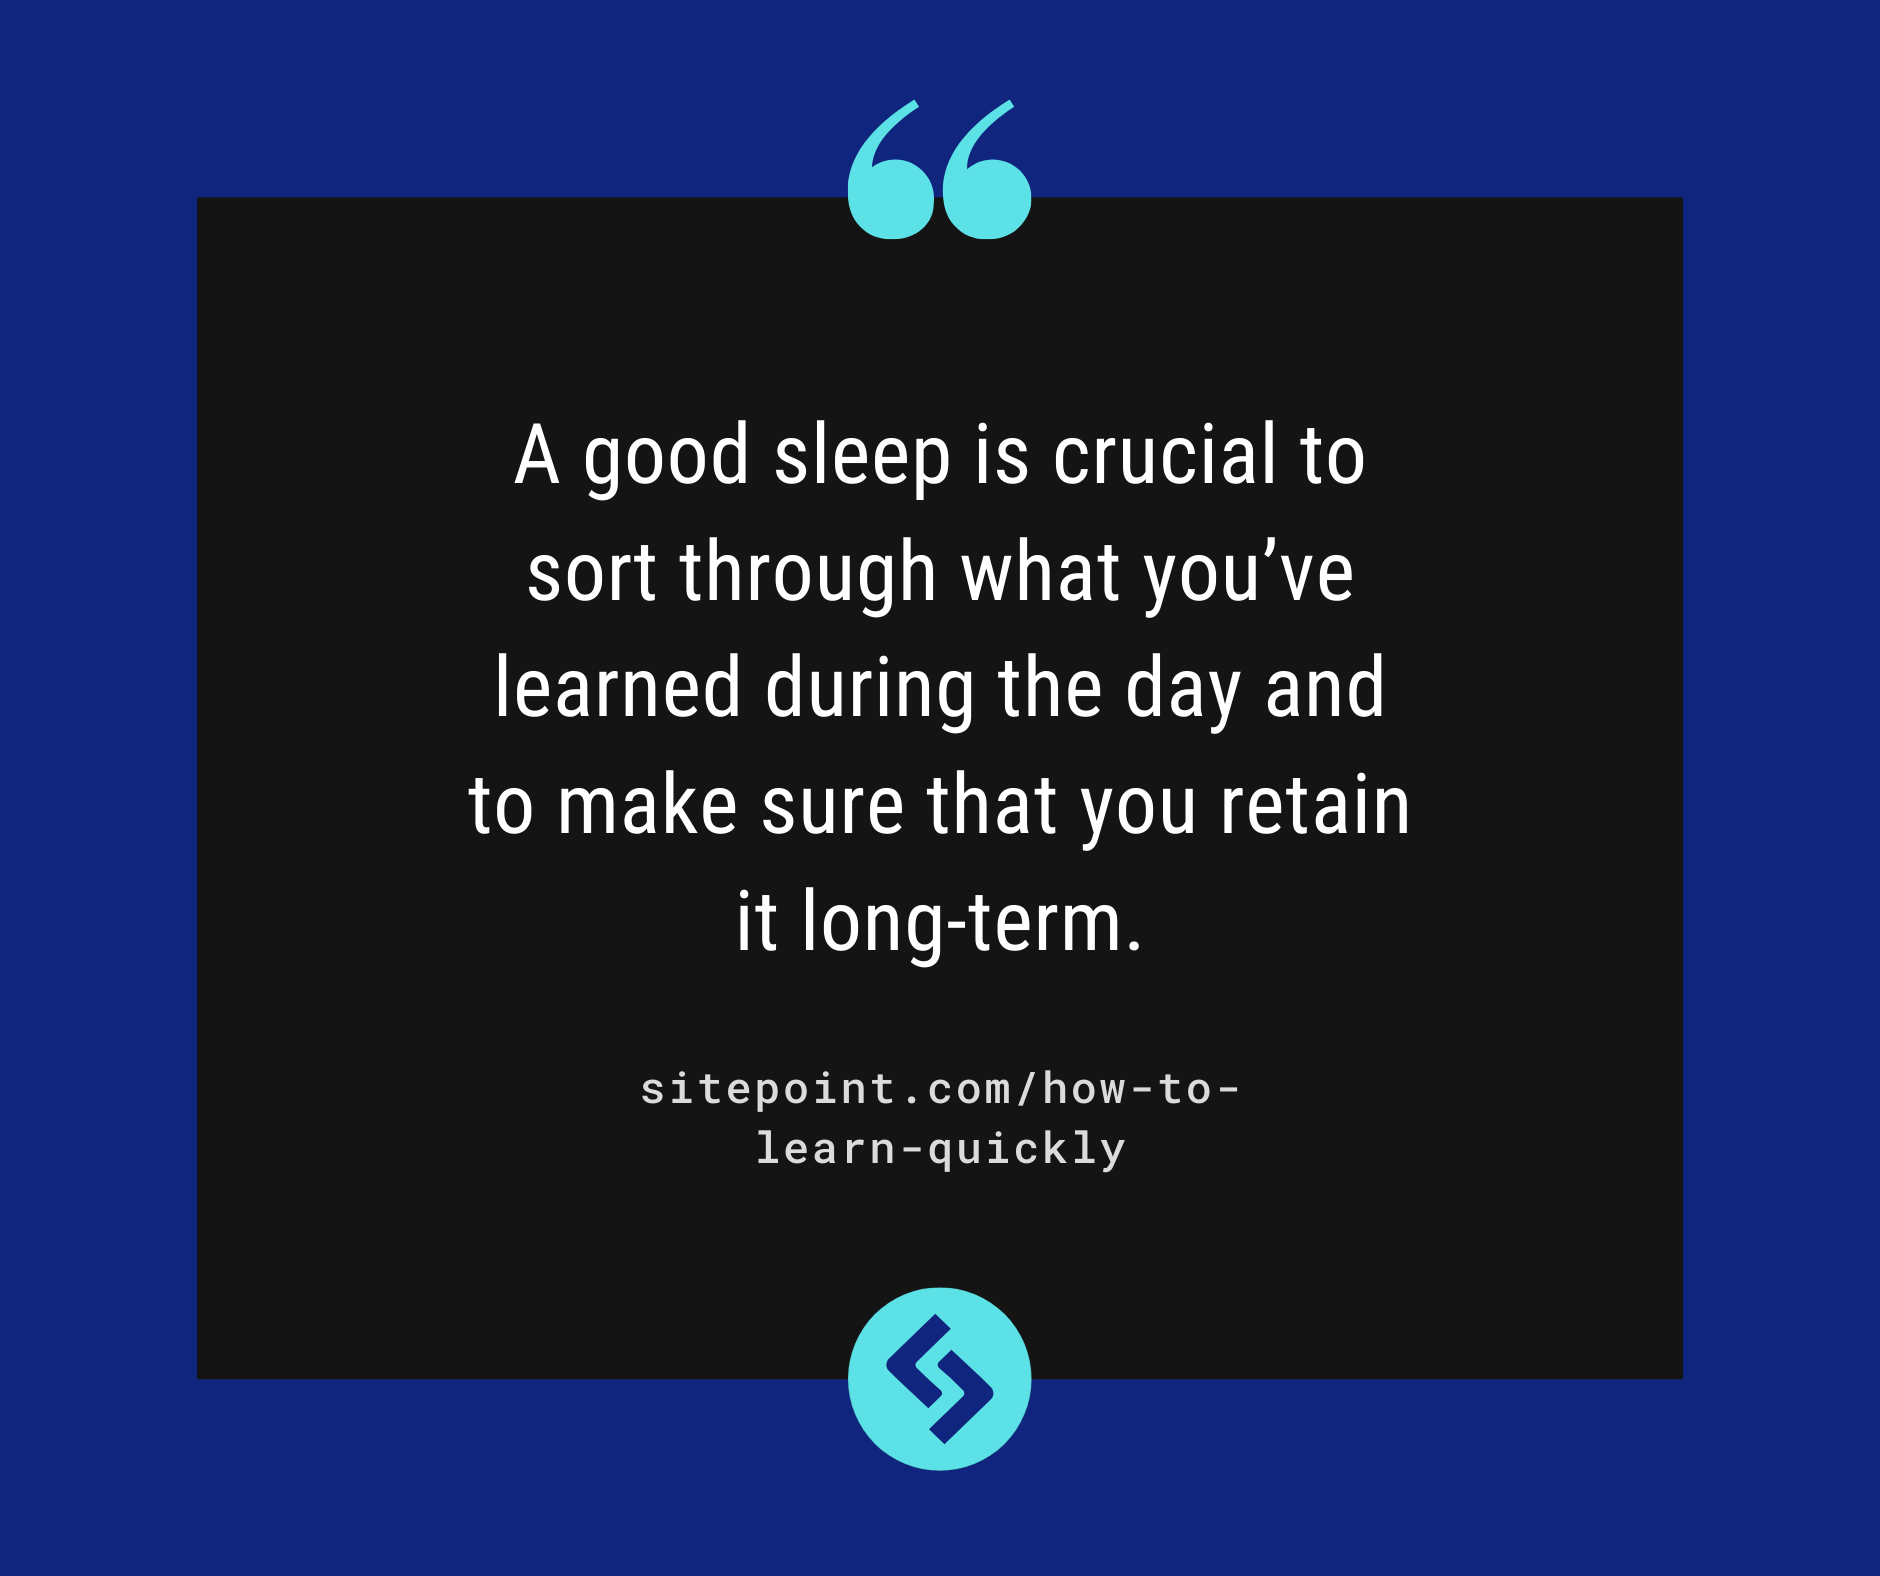 A good sleep is crucial to sort through what you’ve learned during the day and to make sure that you retain it long-term.